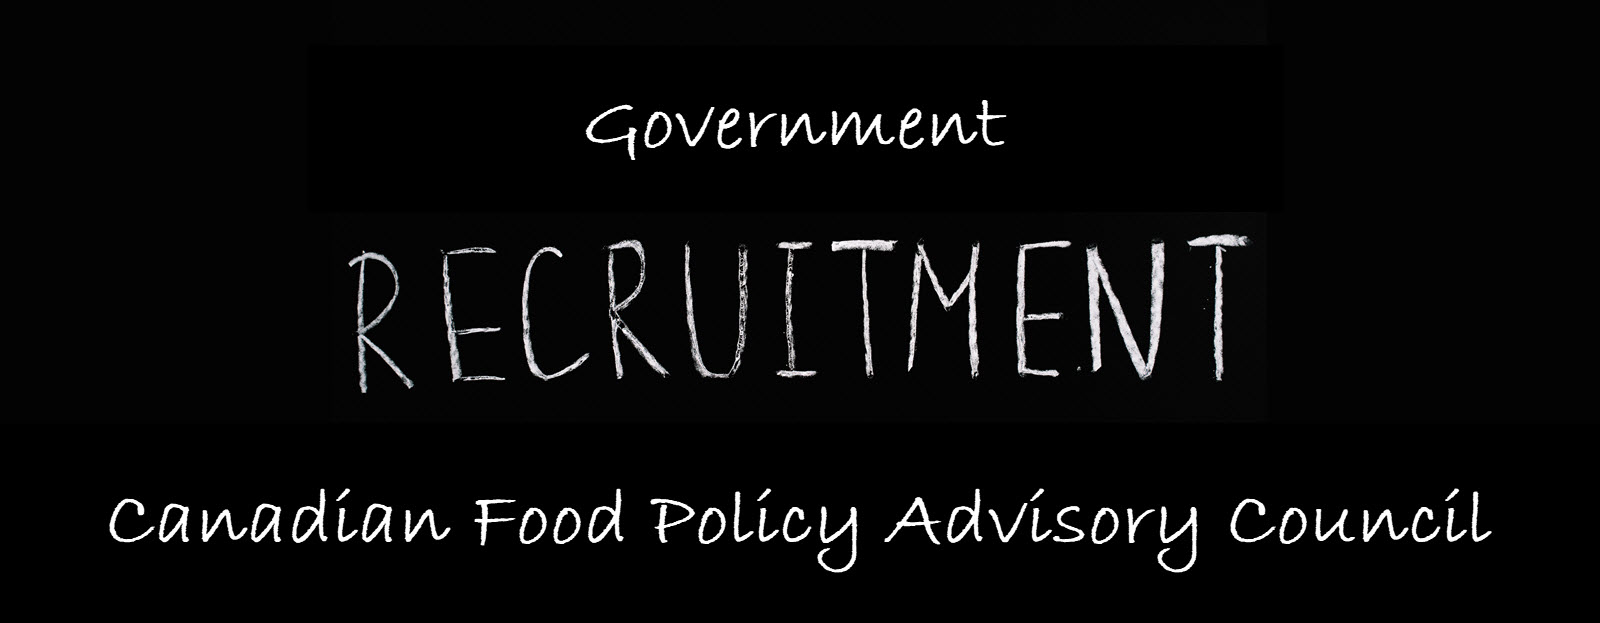 Banner for Government recruiting new members for Canadian Food Policy Advisory Council